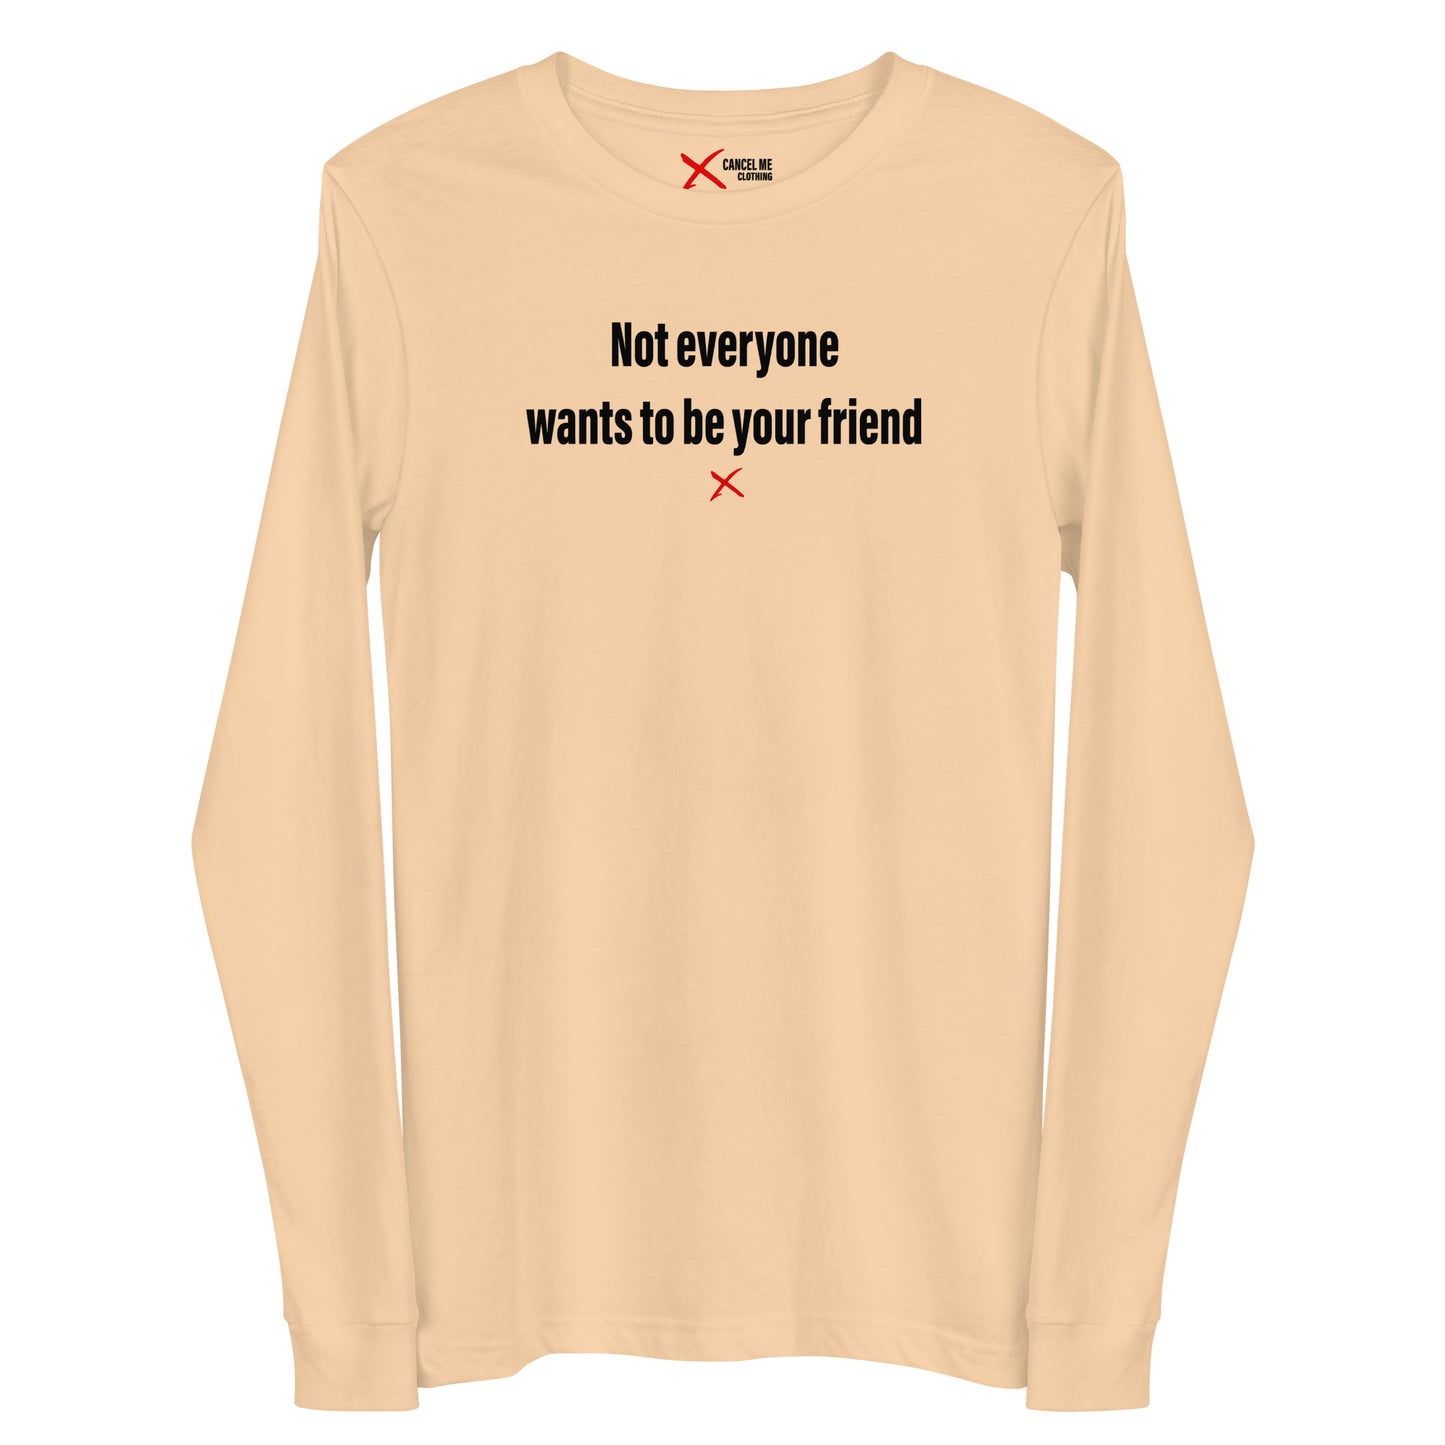 Not everyone wants to be your friend - Longsleeve